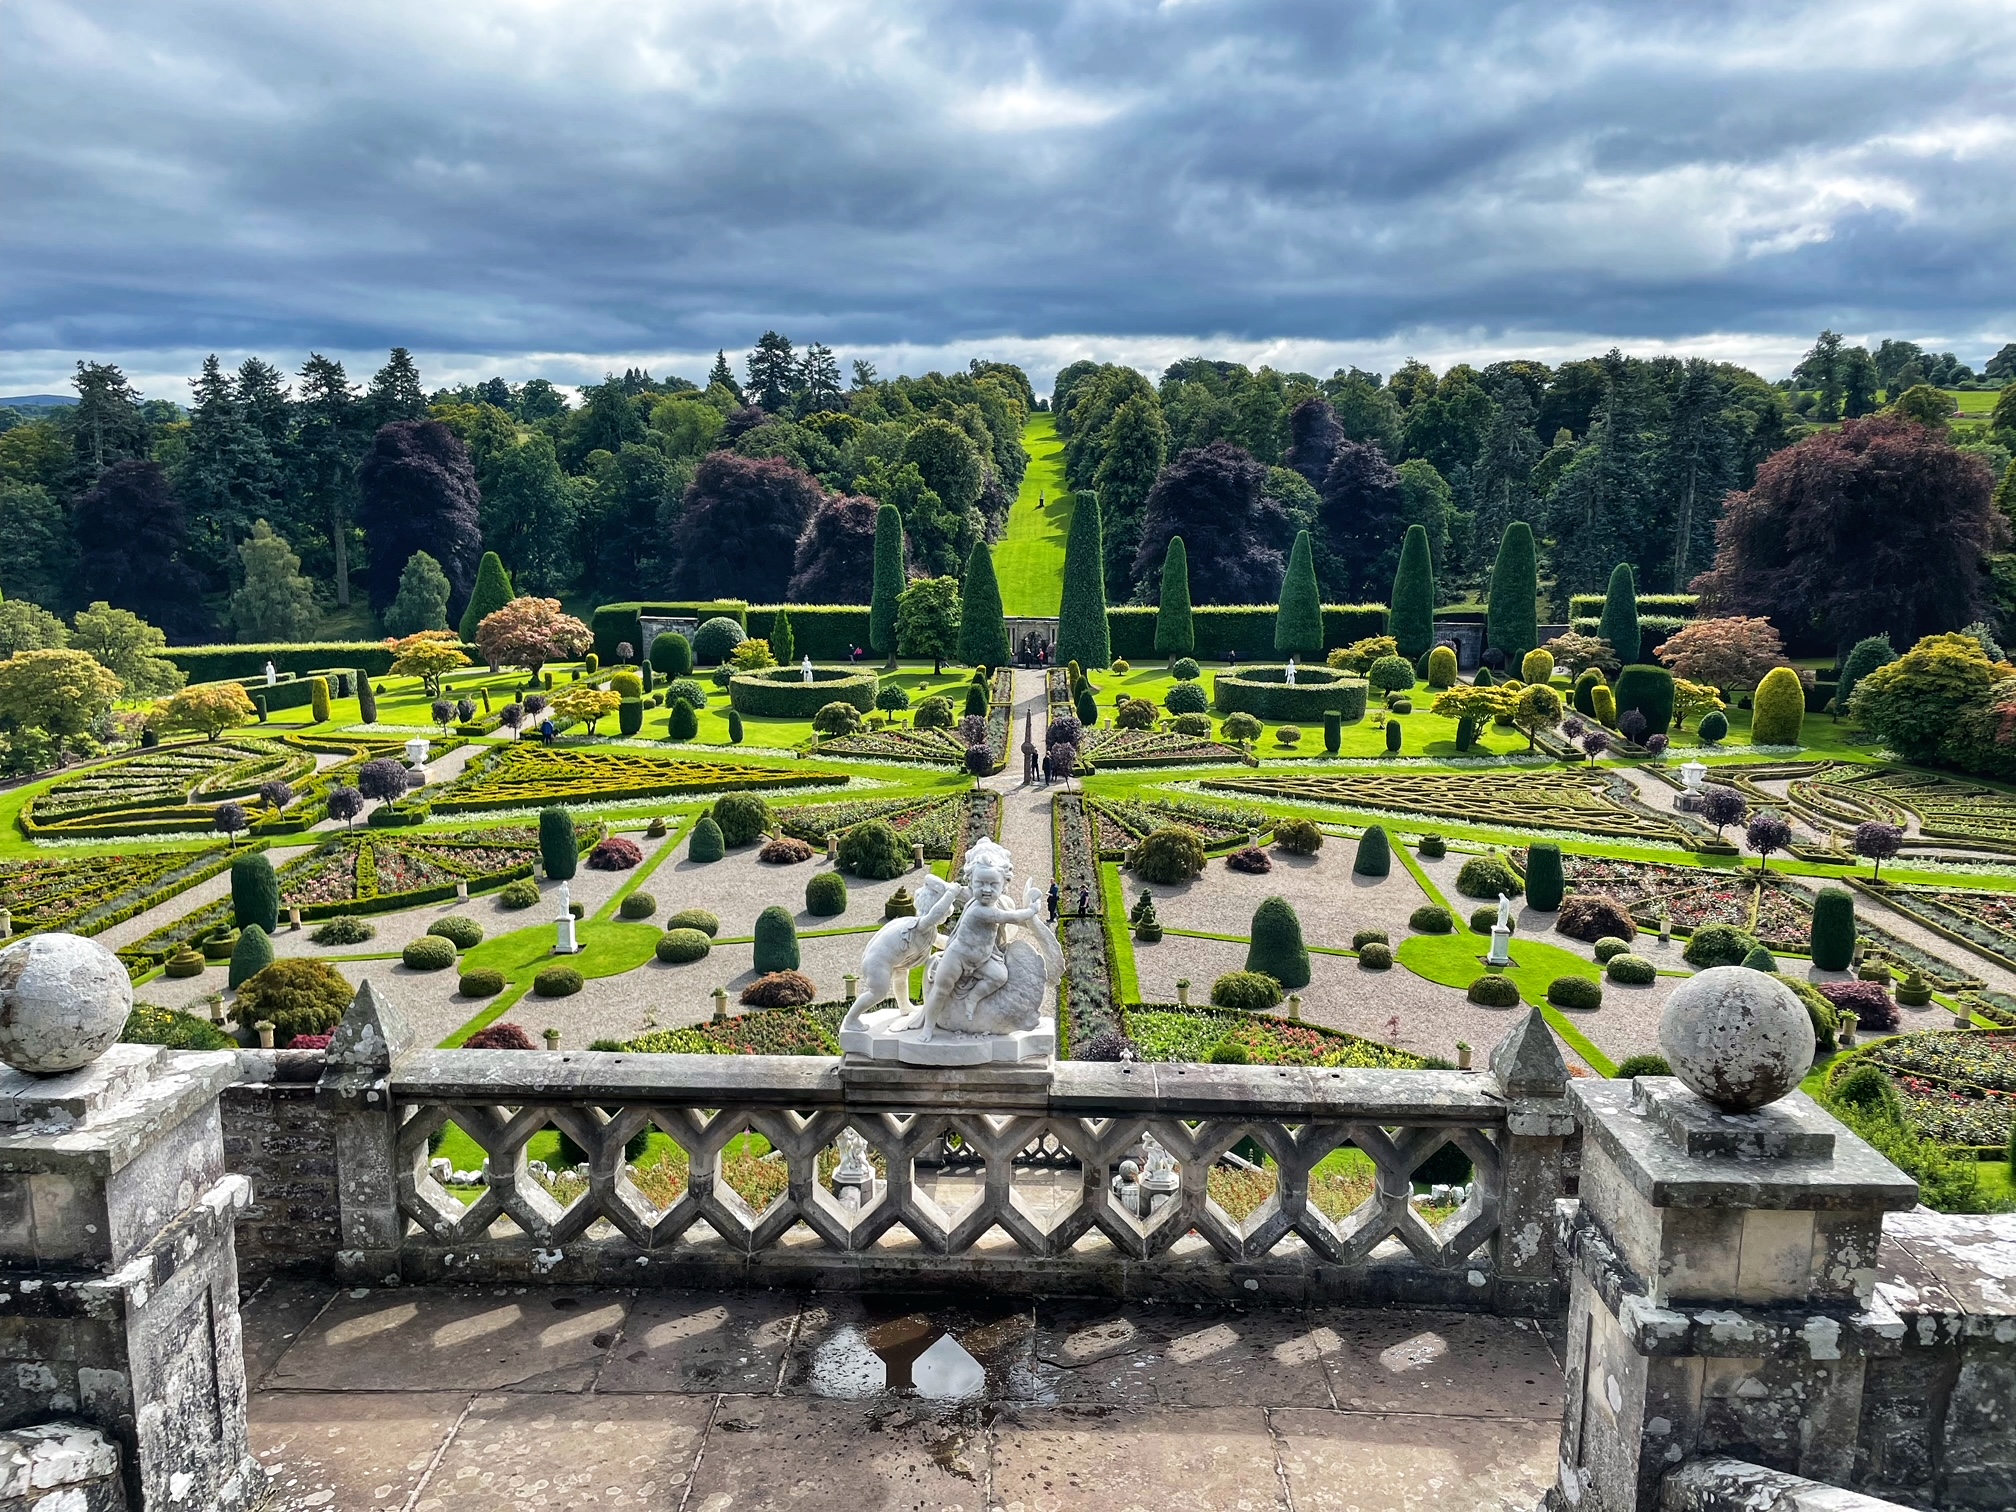 The gardens of Drummond Castle are spectacular. They were filmed in Outlander as a stand in for the Palace of Versailles.